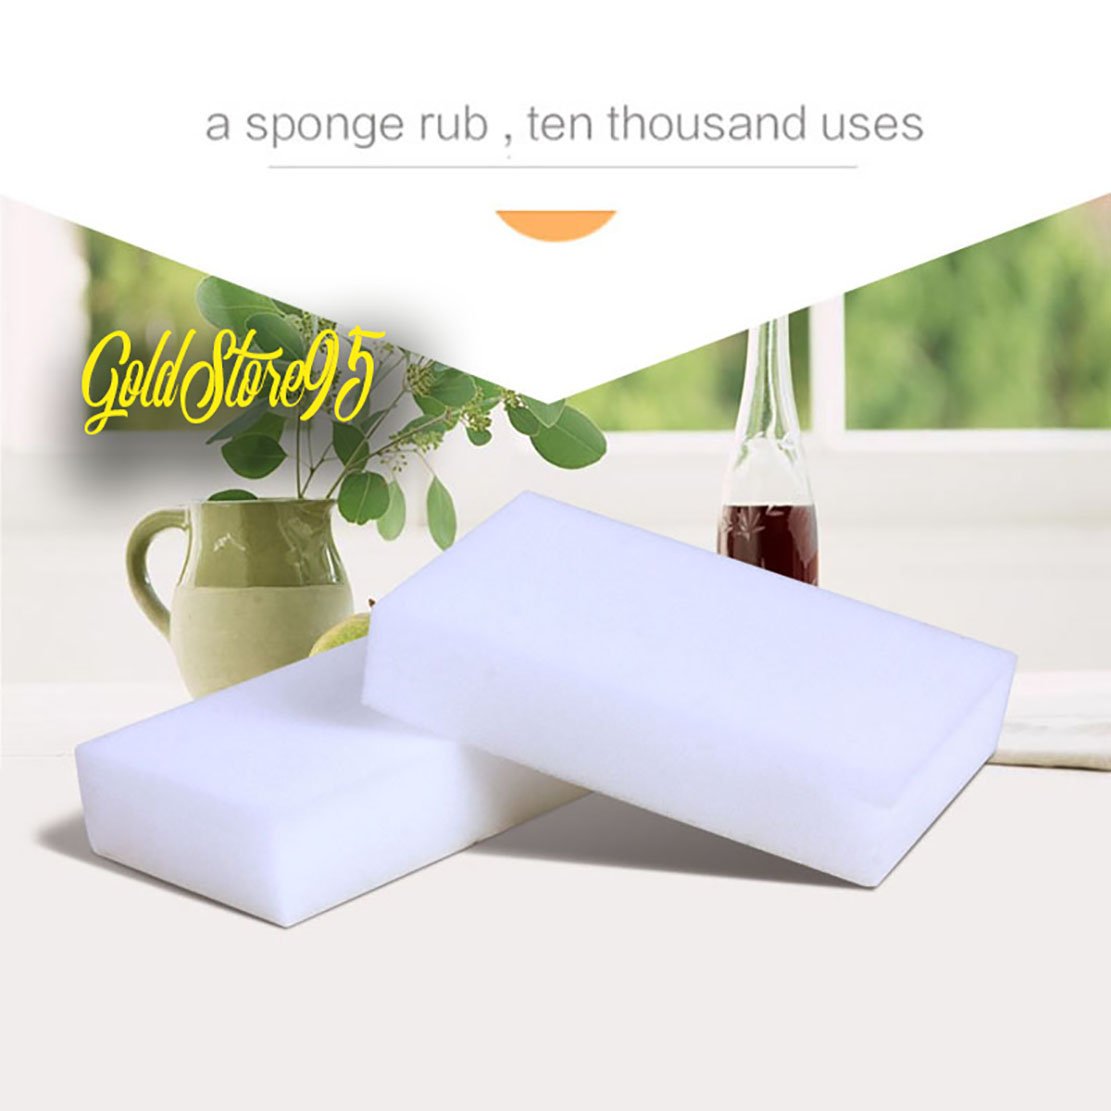 goldstore95 Cleaning Tool Magic Sponges Eraser - Sponge Nano Melamine - Eraser Sponge Kitchen Clean Accessories - Magic Cleaning Sponges - Just Add Water to Erase All Dirt (50pcs, White)